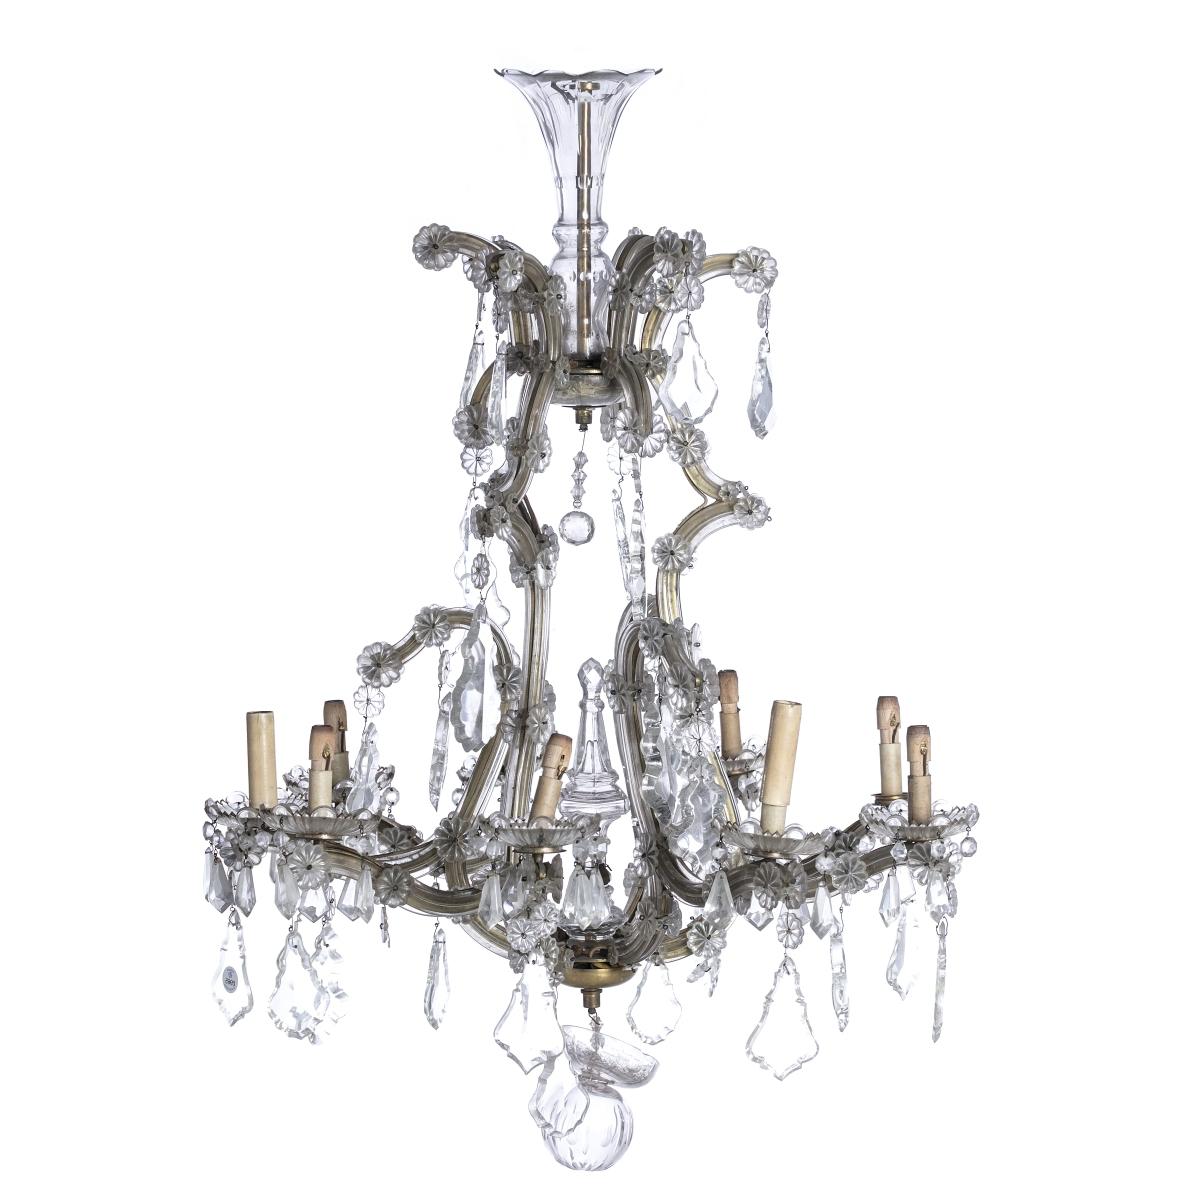 Nine light chandelier Portuguese began 20th century.
Lighting category.
in glass with bronze frame. 
Small defects. 
Height: 75 cm.
very good condition.